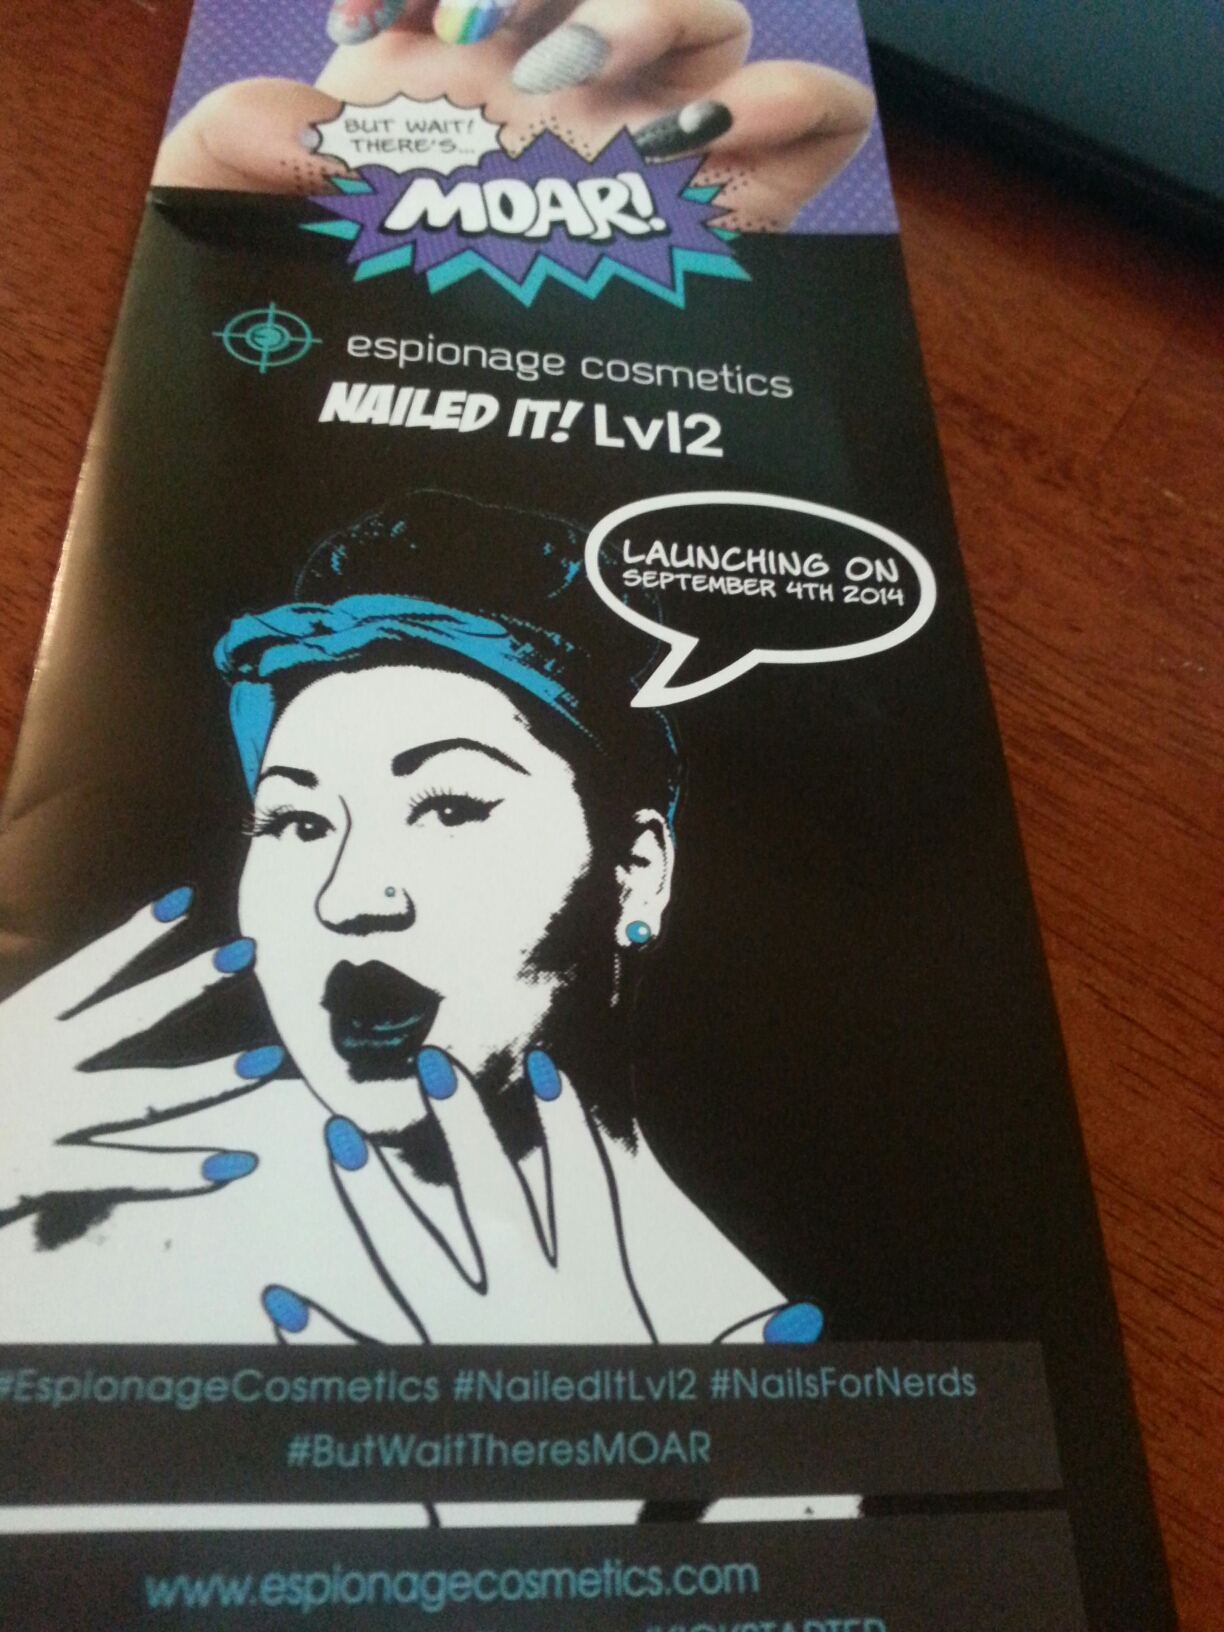 Geek insider, geekinsider, geekinsider. Com,, espionage cosmetics nailed it! Nail wraps - review, lady geek